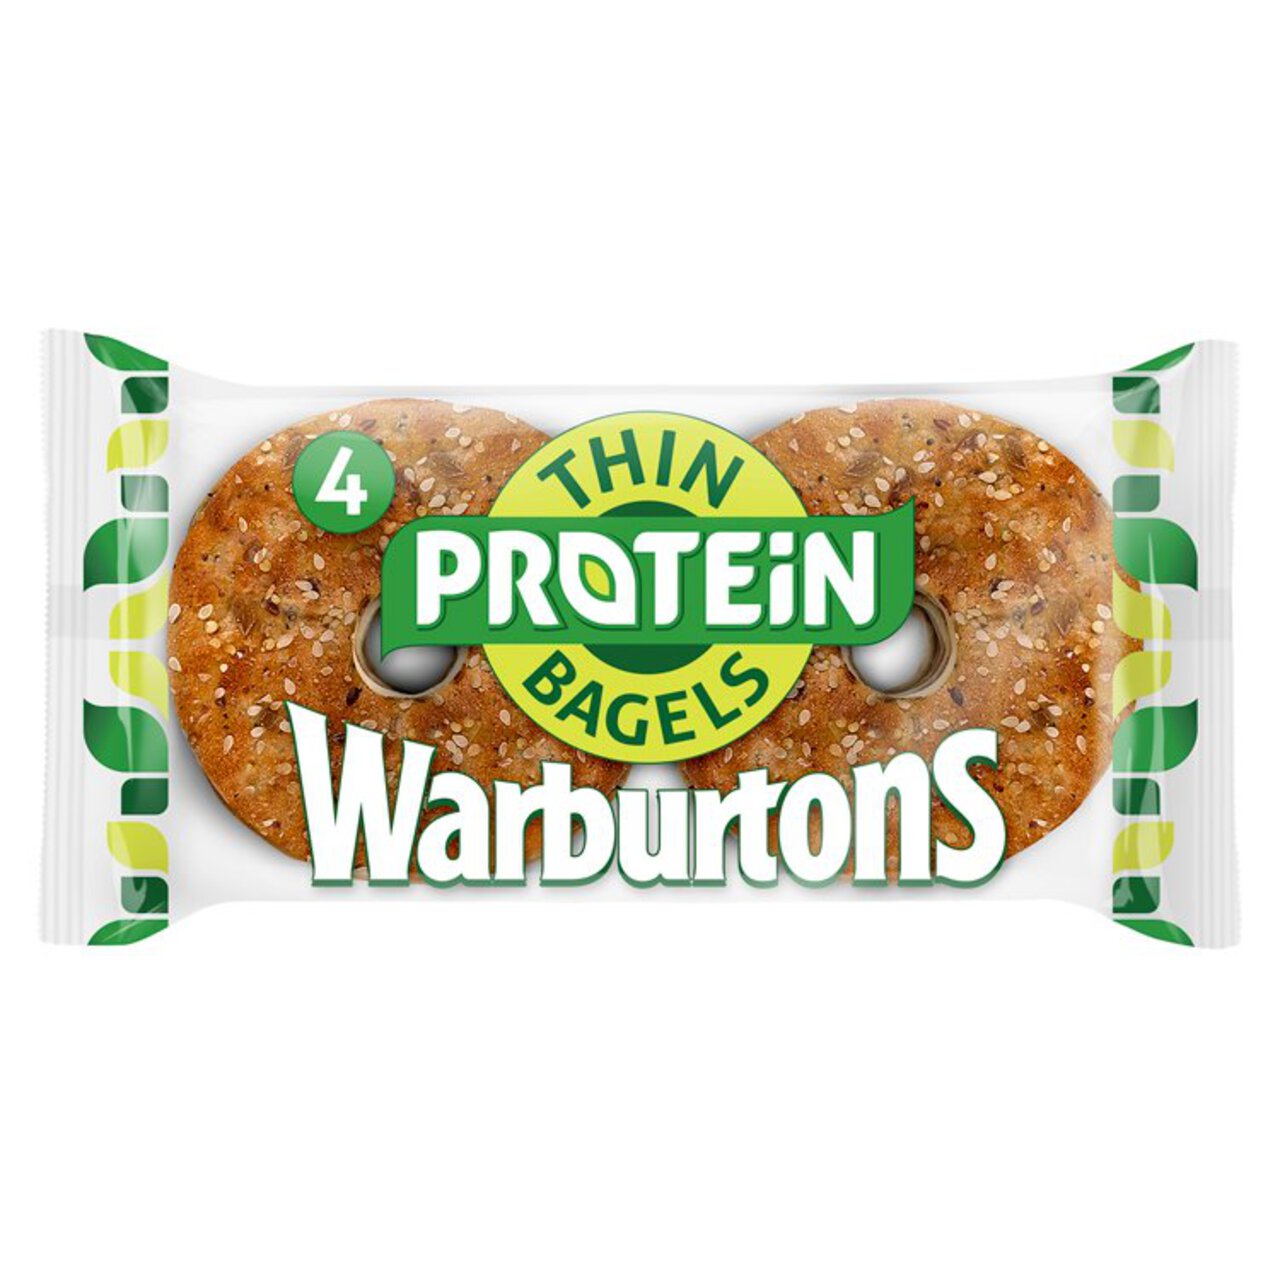 Warburtons Protein Thin Bagels 4 per pack